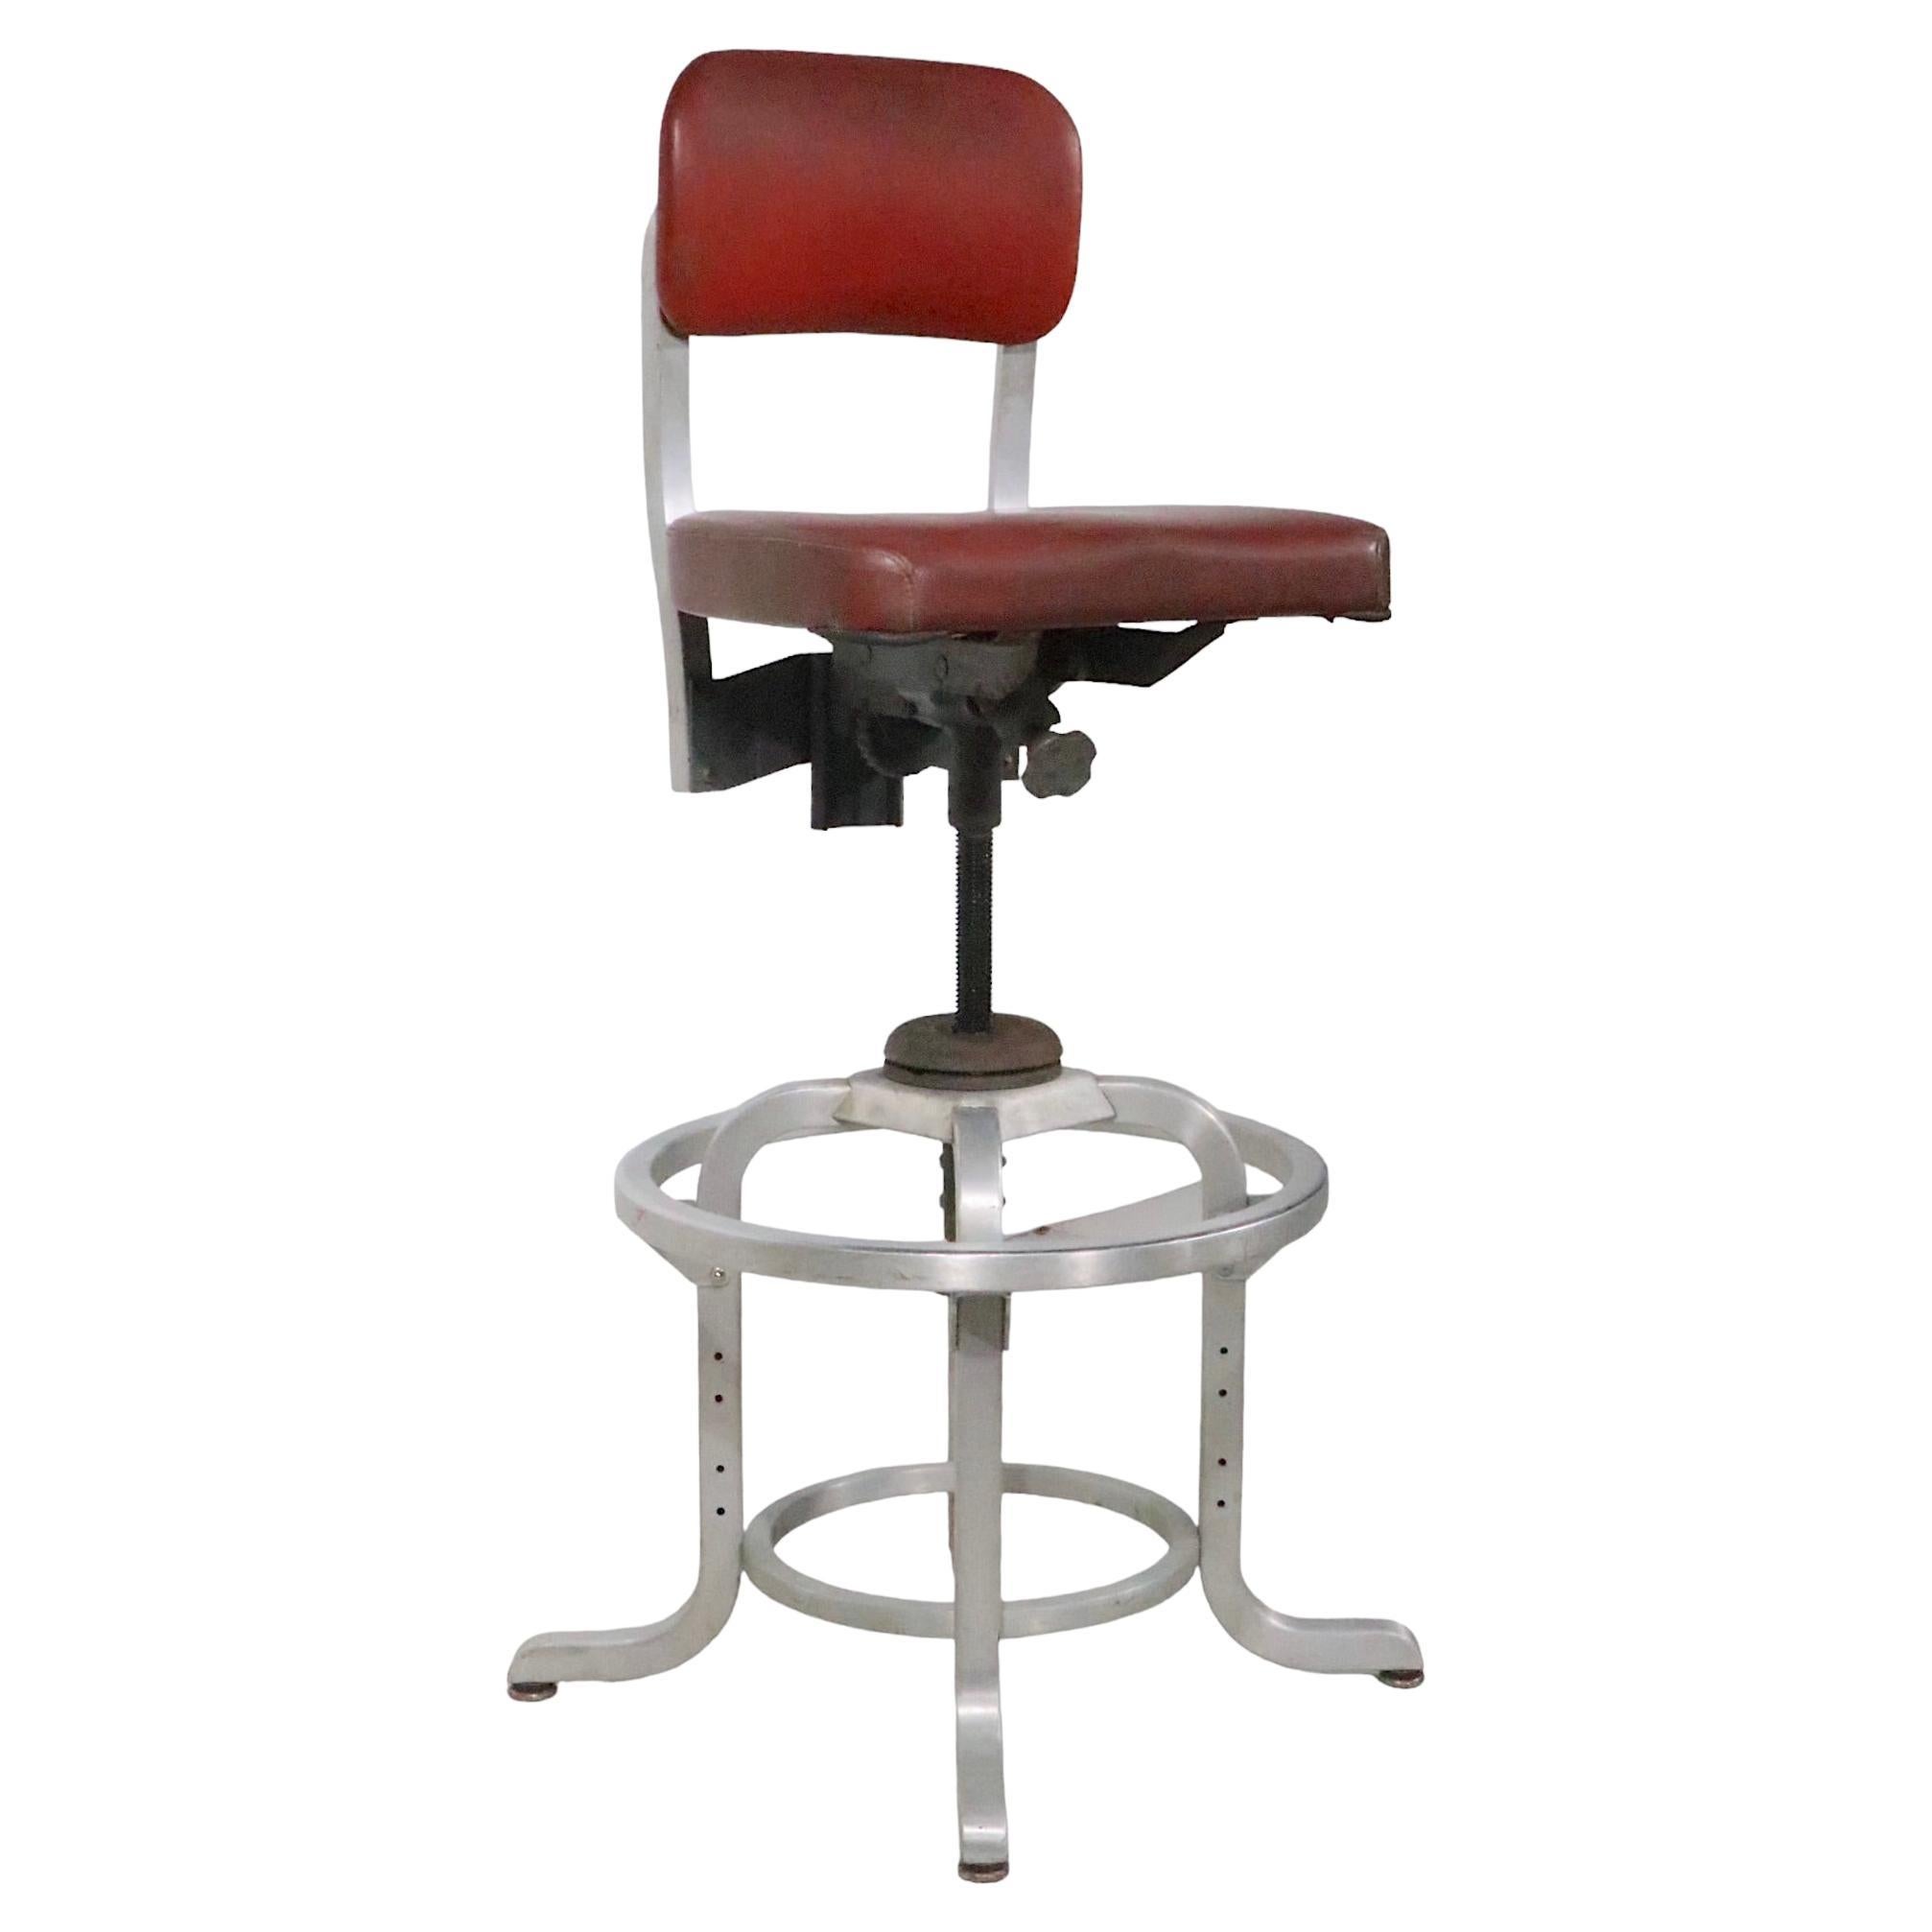 Adjustable Drafting Stool by General Fireproofing GoodForm 